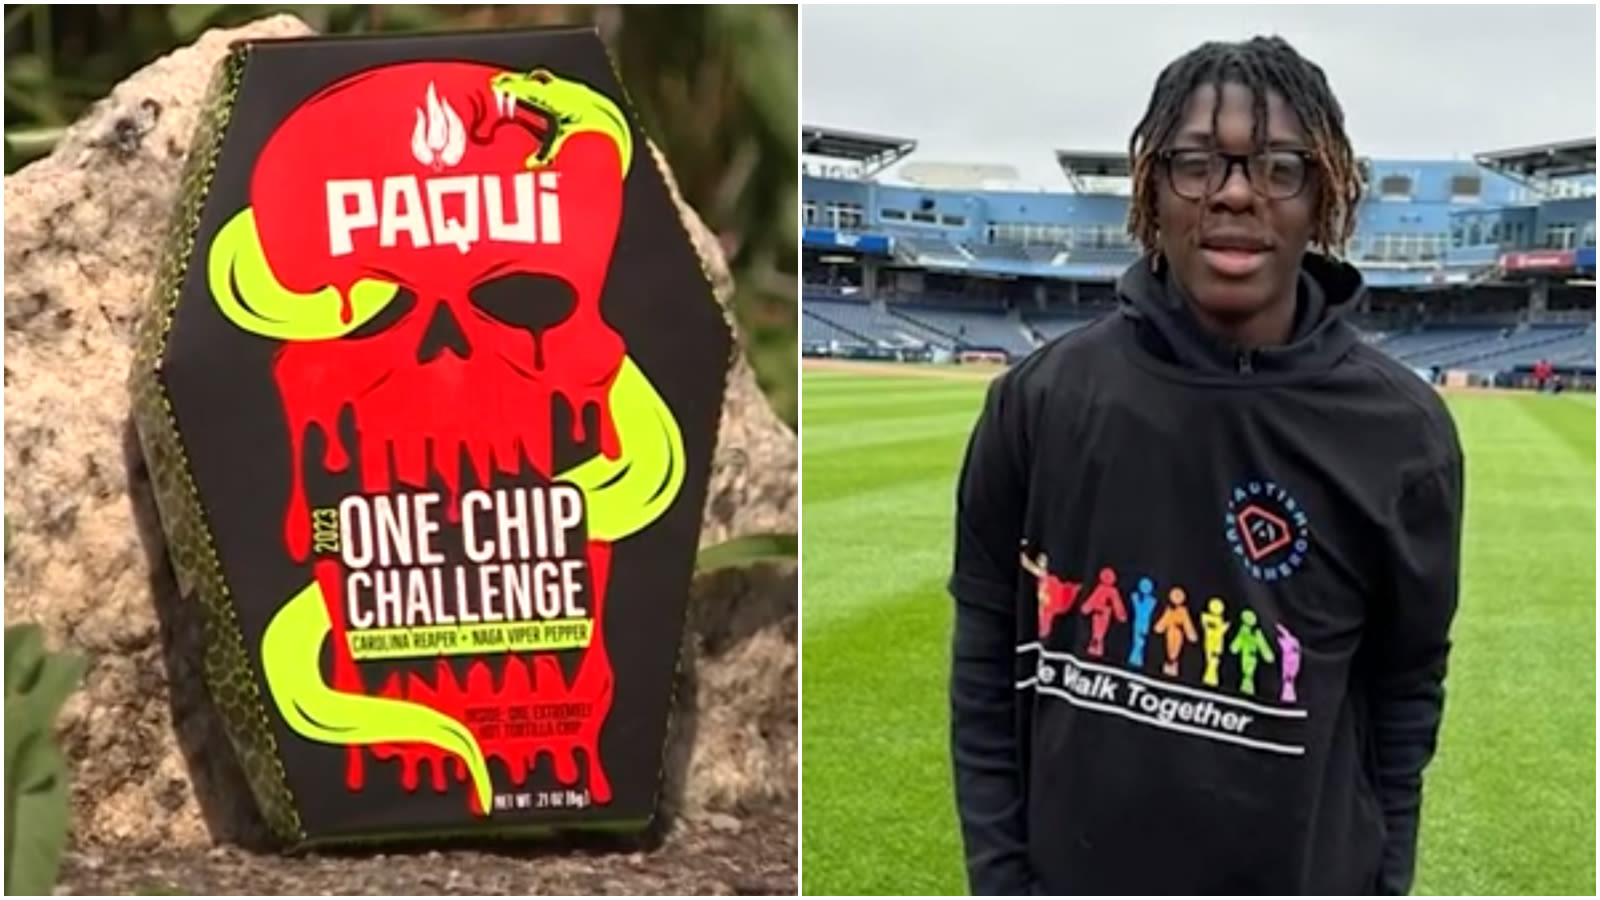 Spicy chip pulled after Mass. teen dies after 'One Chip Challenge